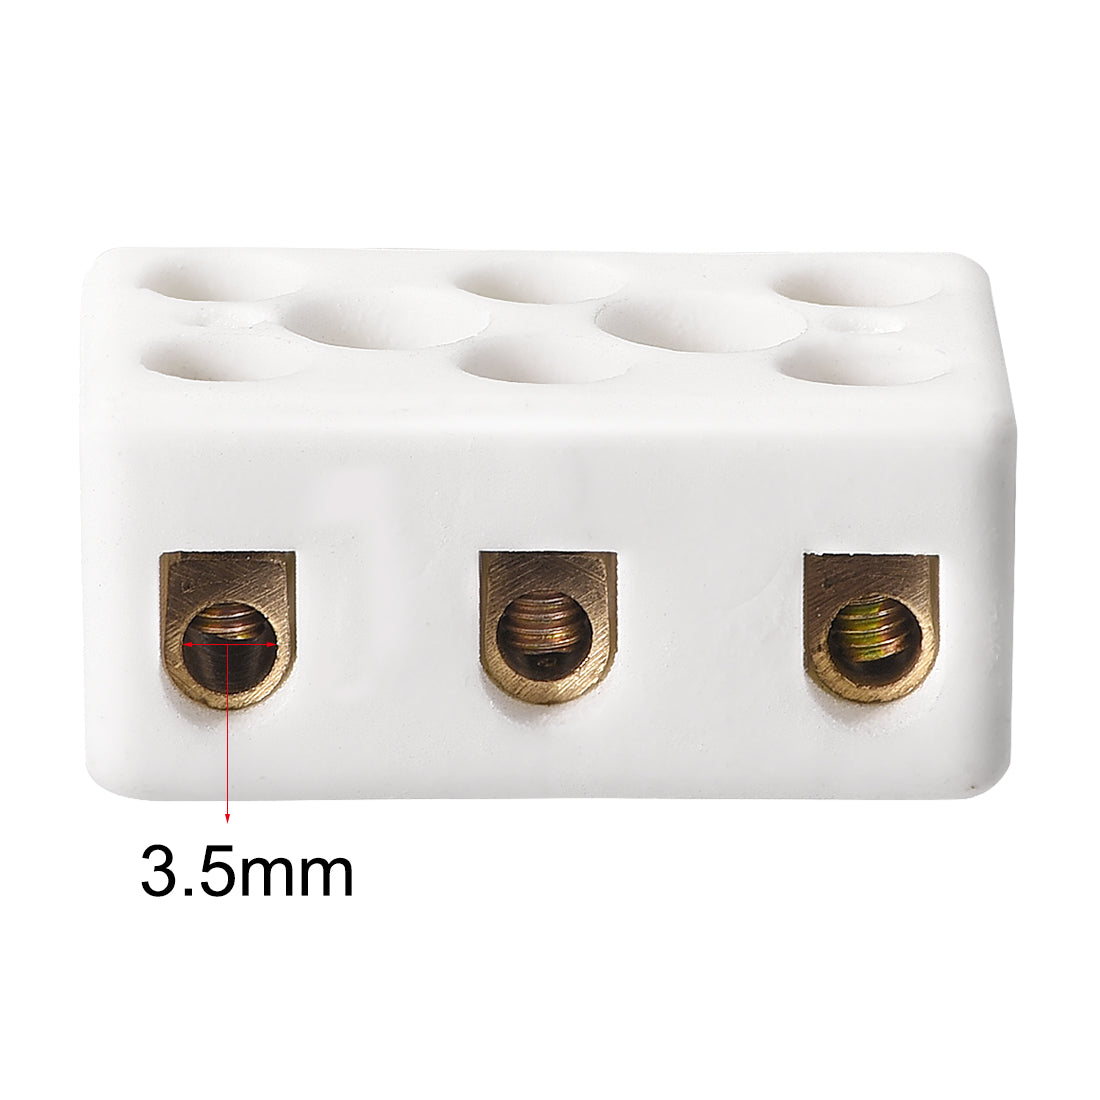 uxcell Uxcell 3 Way Ceramics Terminal Blocks High Temp Porcelain Ceramic Connectors 31x20x14mm for Electrical Wire Cable